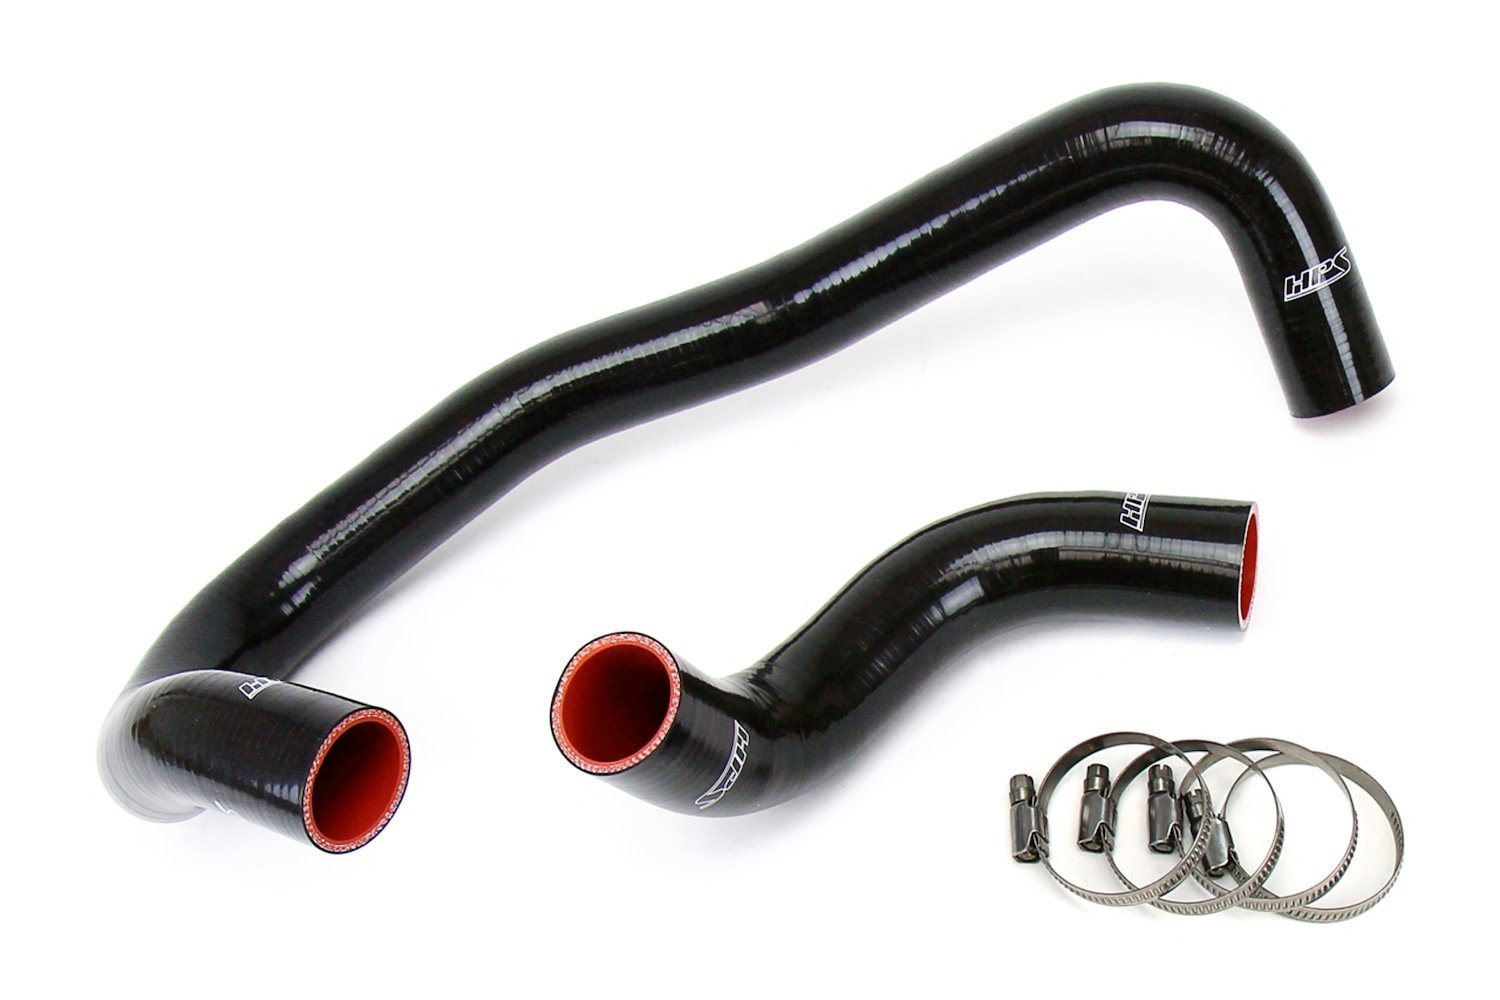 57-1327R-BLK Radiator Hose Kit, High-Temp 3-Ply Reinforced Silicone, Replaces OEM Rubber Radiator Hoses